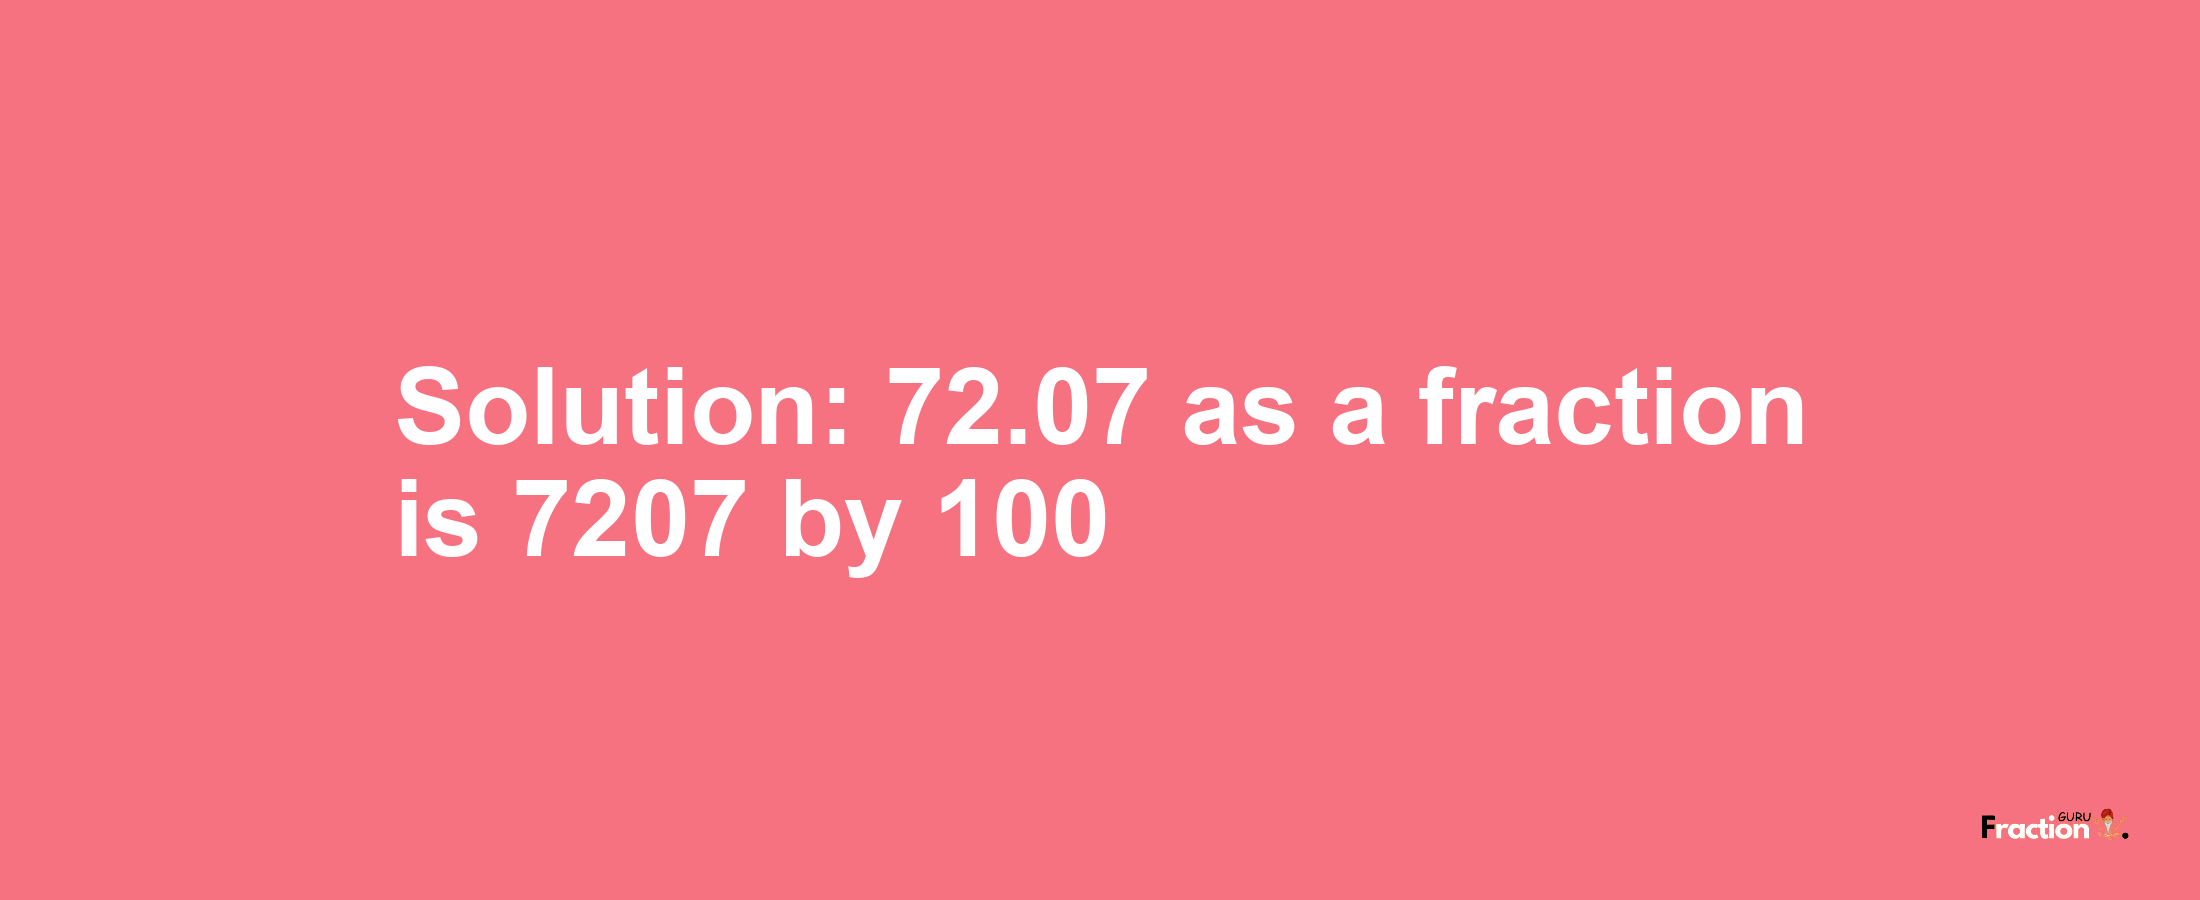 Solution:72.07 as a fraction is 7207/100